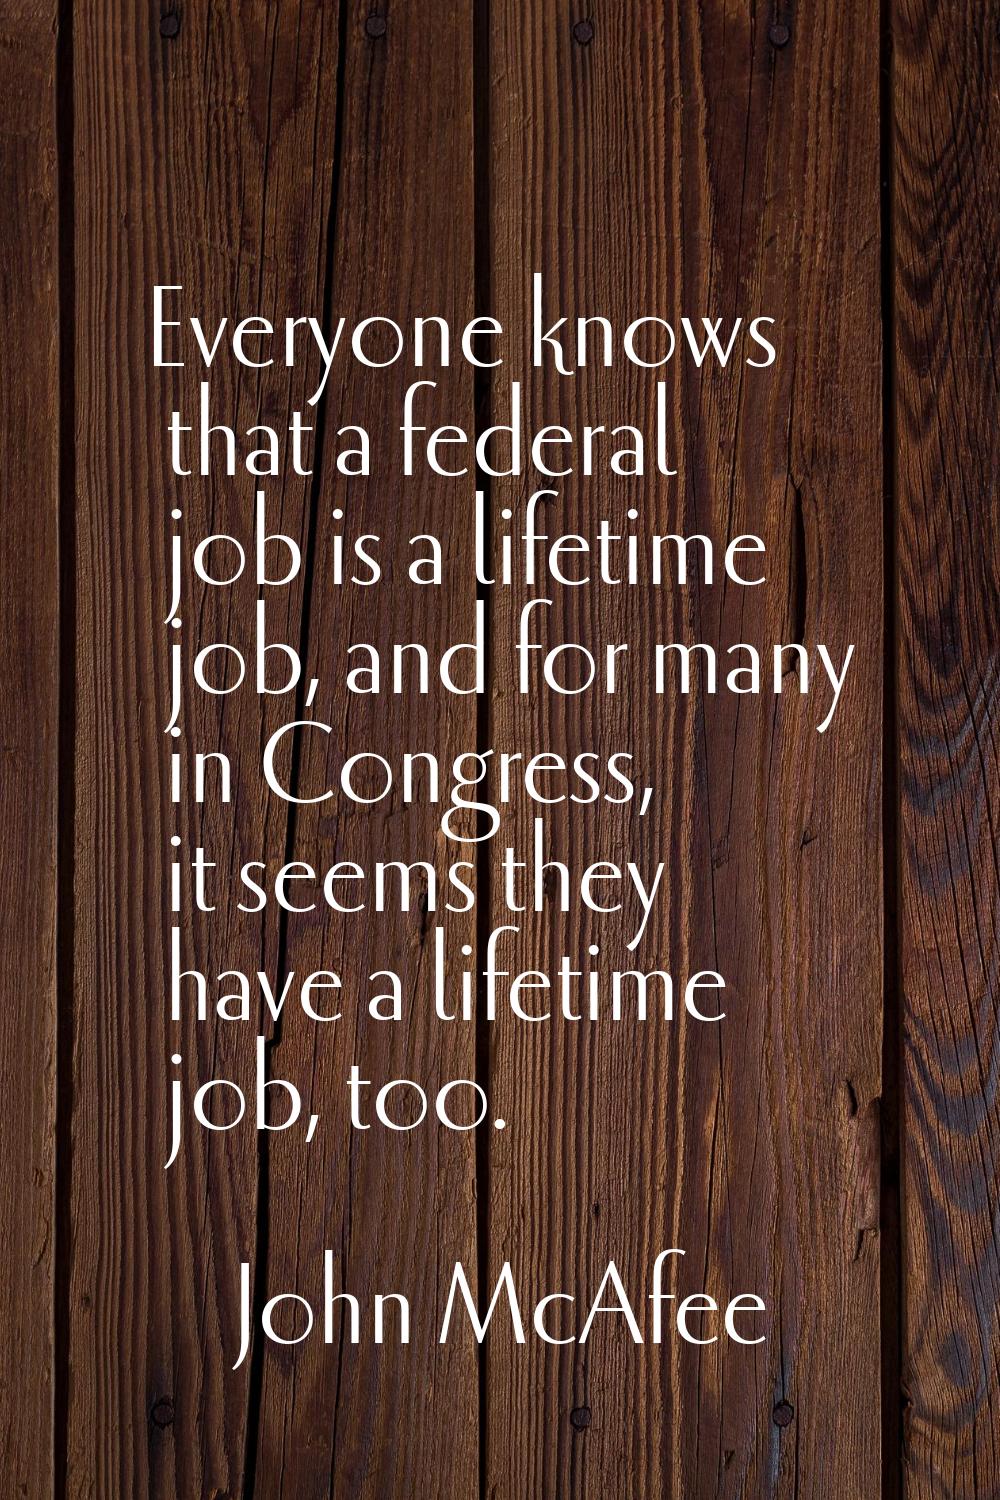 Everyone knows that a federal job is a lifetime job, and for many in Congress, it seems they have a